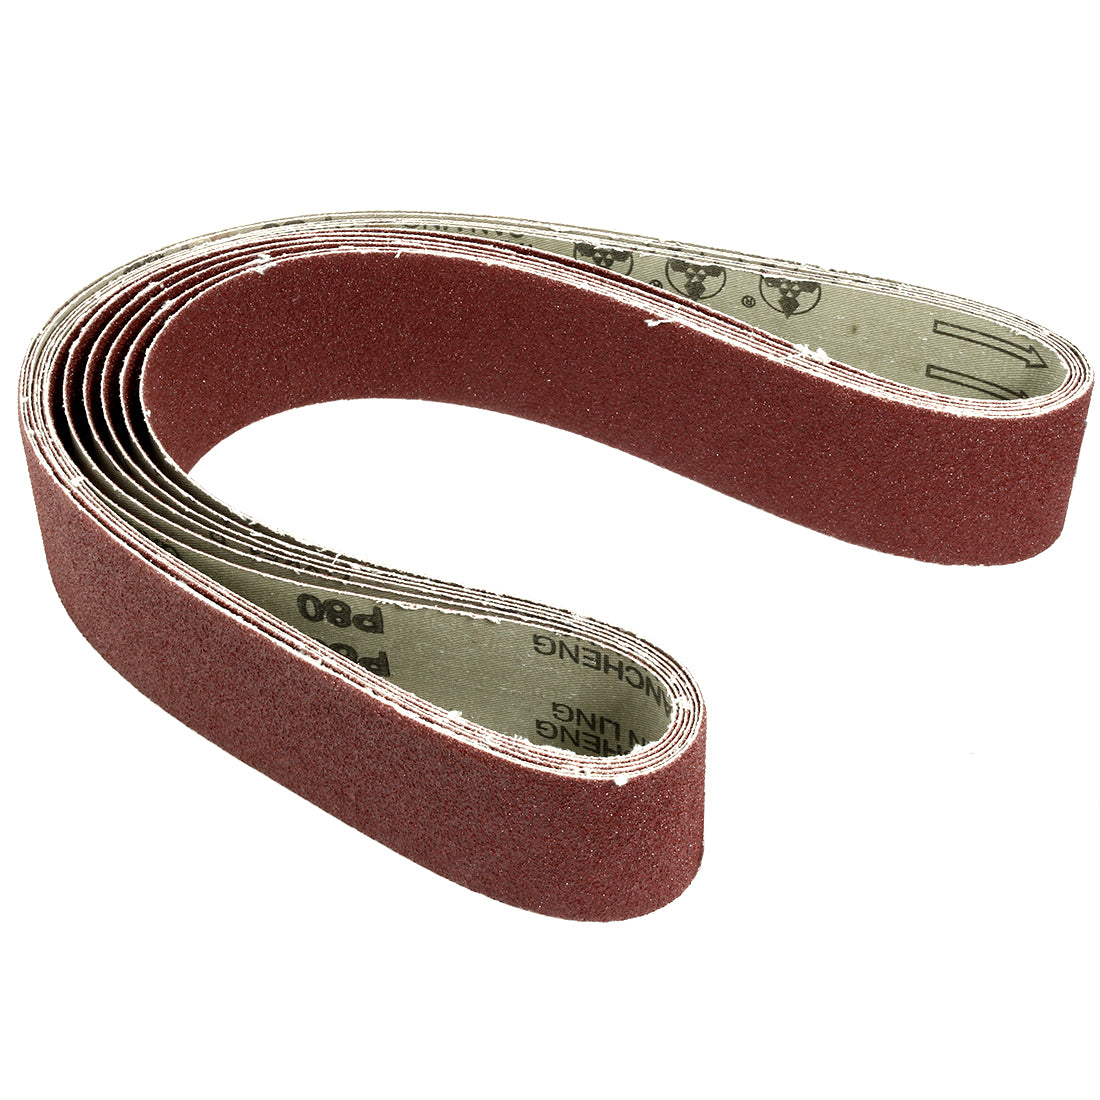 uxcell Uxcell 2-Inch x 42-Inch Aluminum Oxide Sanding Belt 80 Grits Lapped Joint 6pcs